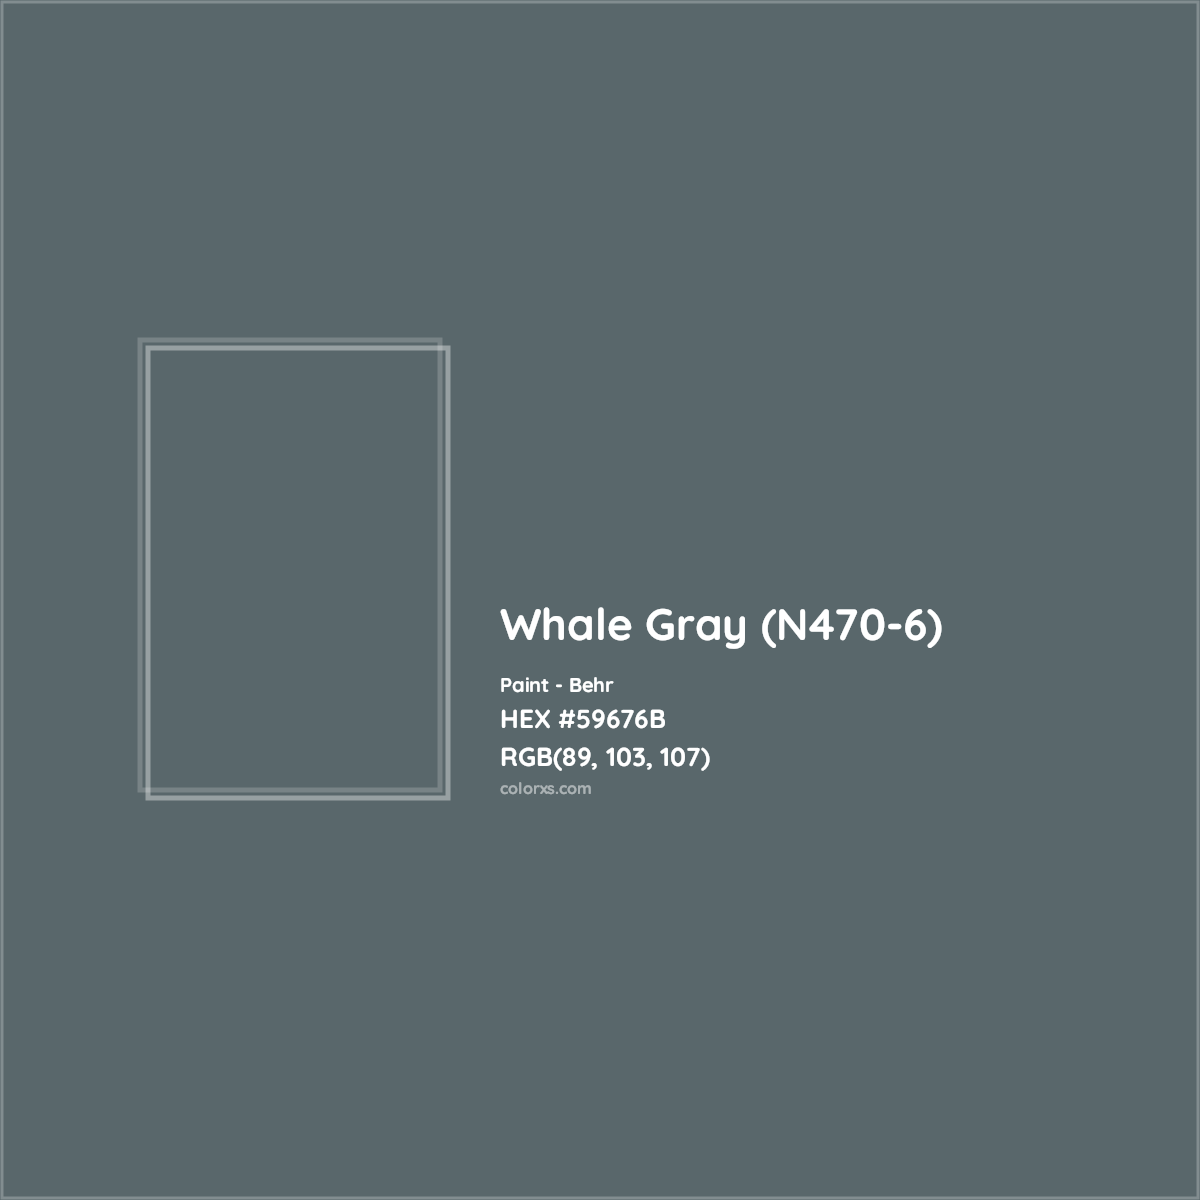 HEX #59676B Whale Gray (N470-6) Paint Behr - Color Code